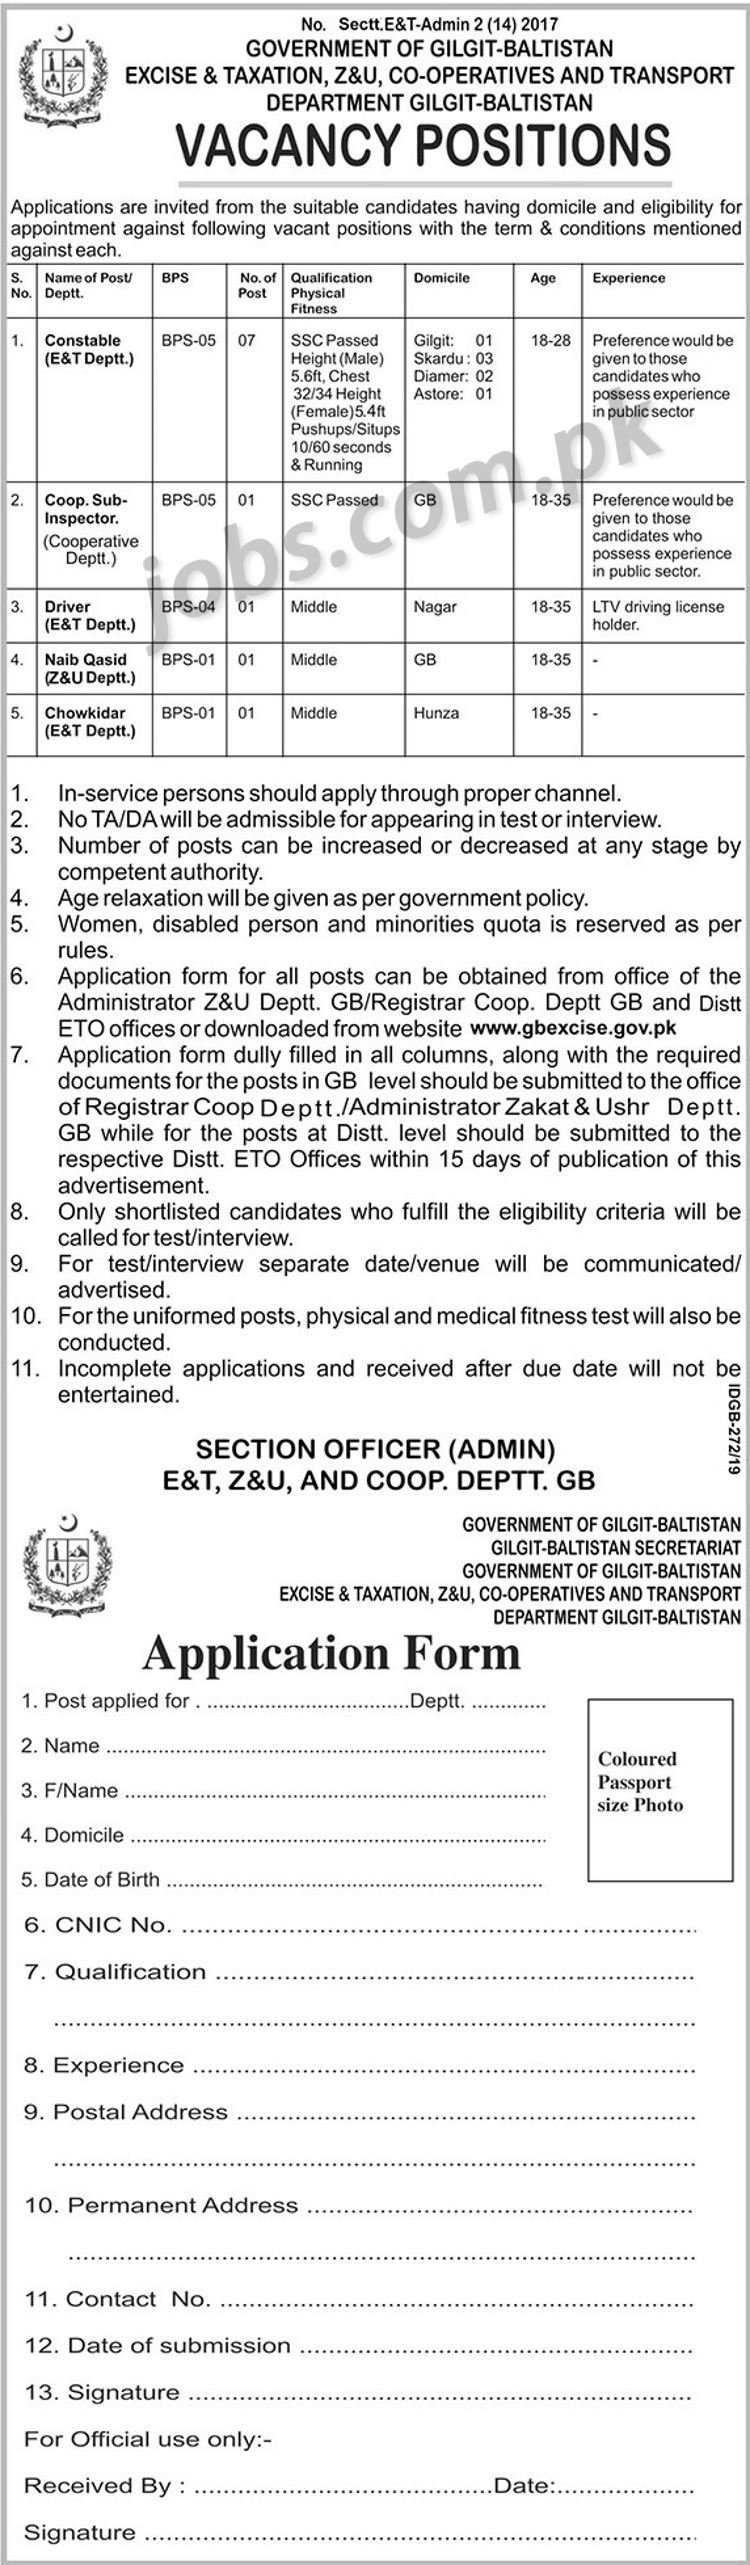 Excise & Taxation Department Gilgit Baltistan Jobs 2019 for Constables, Constable Sub-Inspectors, Driver & Support Staff